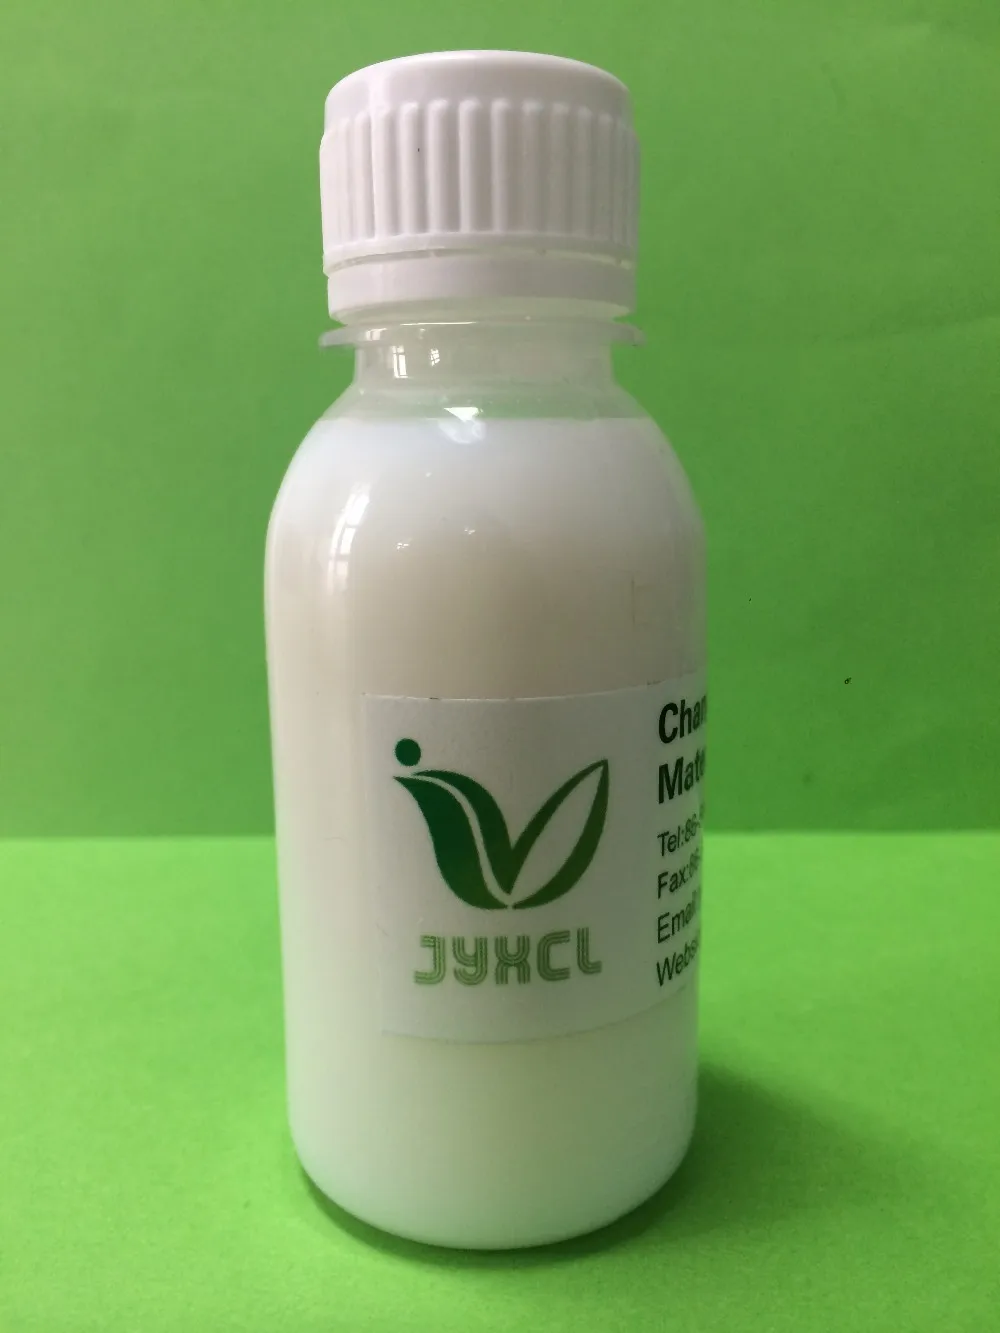 JY 308 silicon micro emulsion for hollow polyester staple fiber (60419251932)